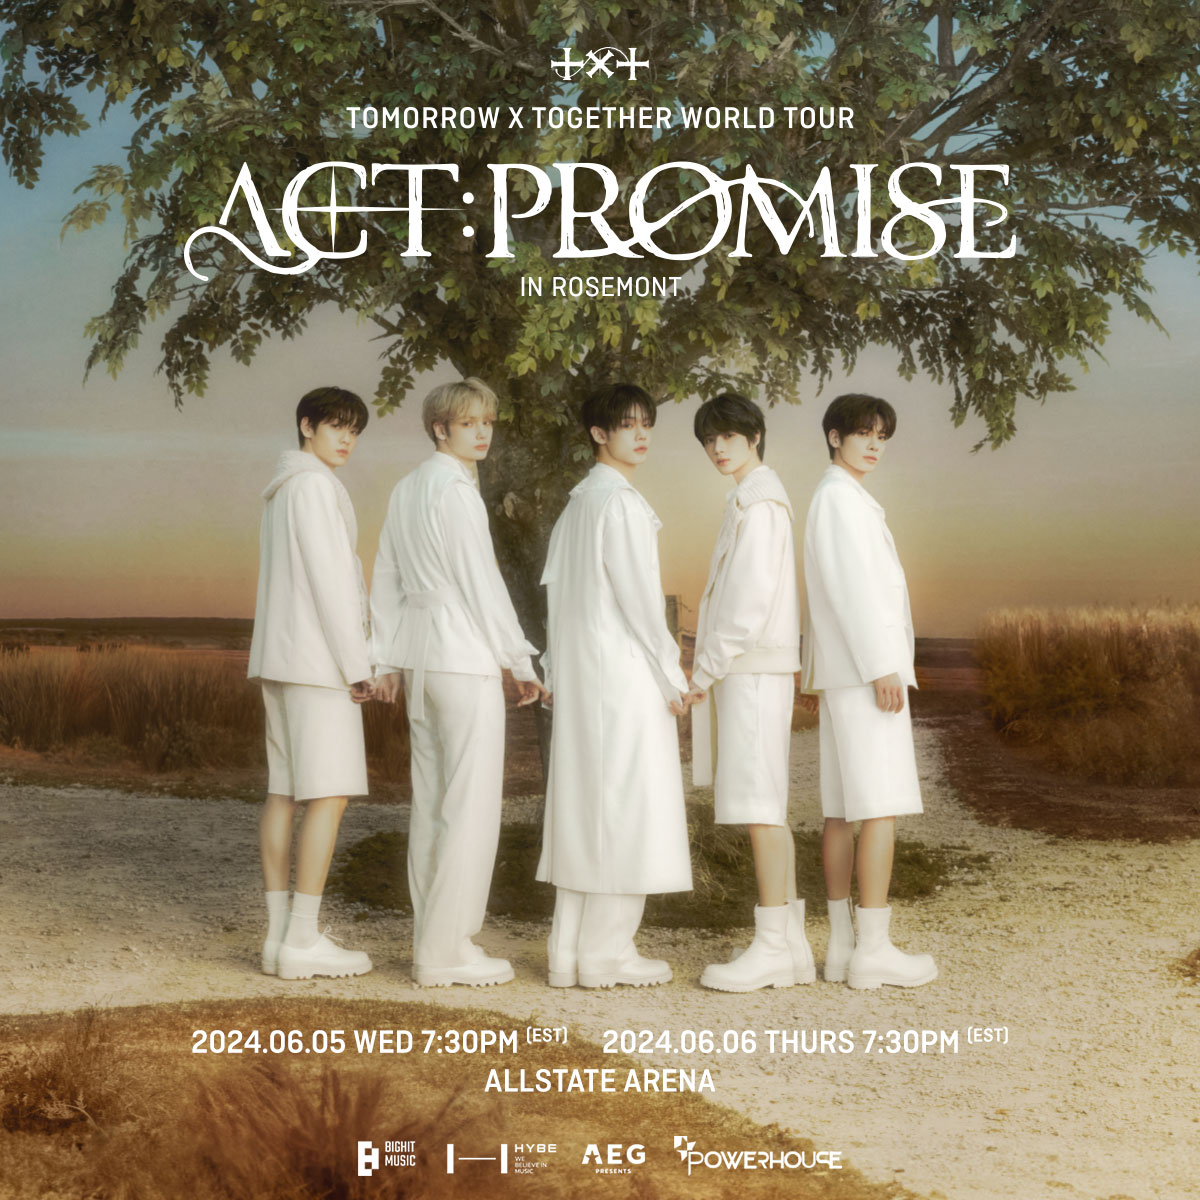 TOMORROW X TOGETHER WORLD TOUR <ACT : PROMISE> IN U.S. is coming on June 5 & 6! Register now to get early access to tickets at txt-actpromiseus.com MOA MEMBERSHIP PRESALE tickets on sale Wed March 27th at 4pm and General tickets on sale, Thu March 28 at 4pm.